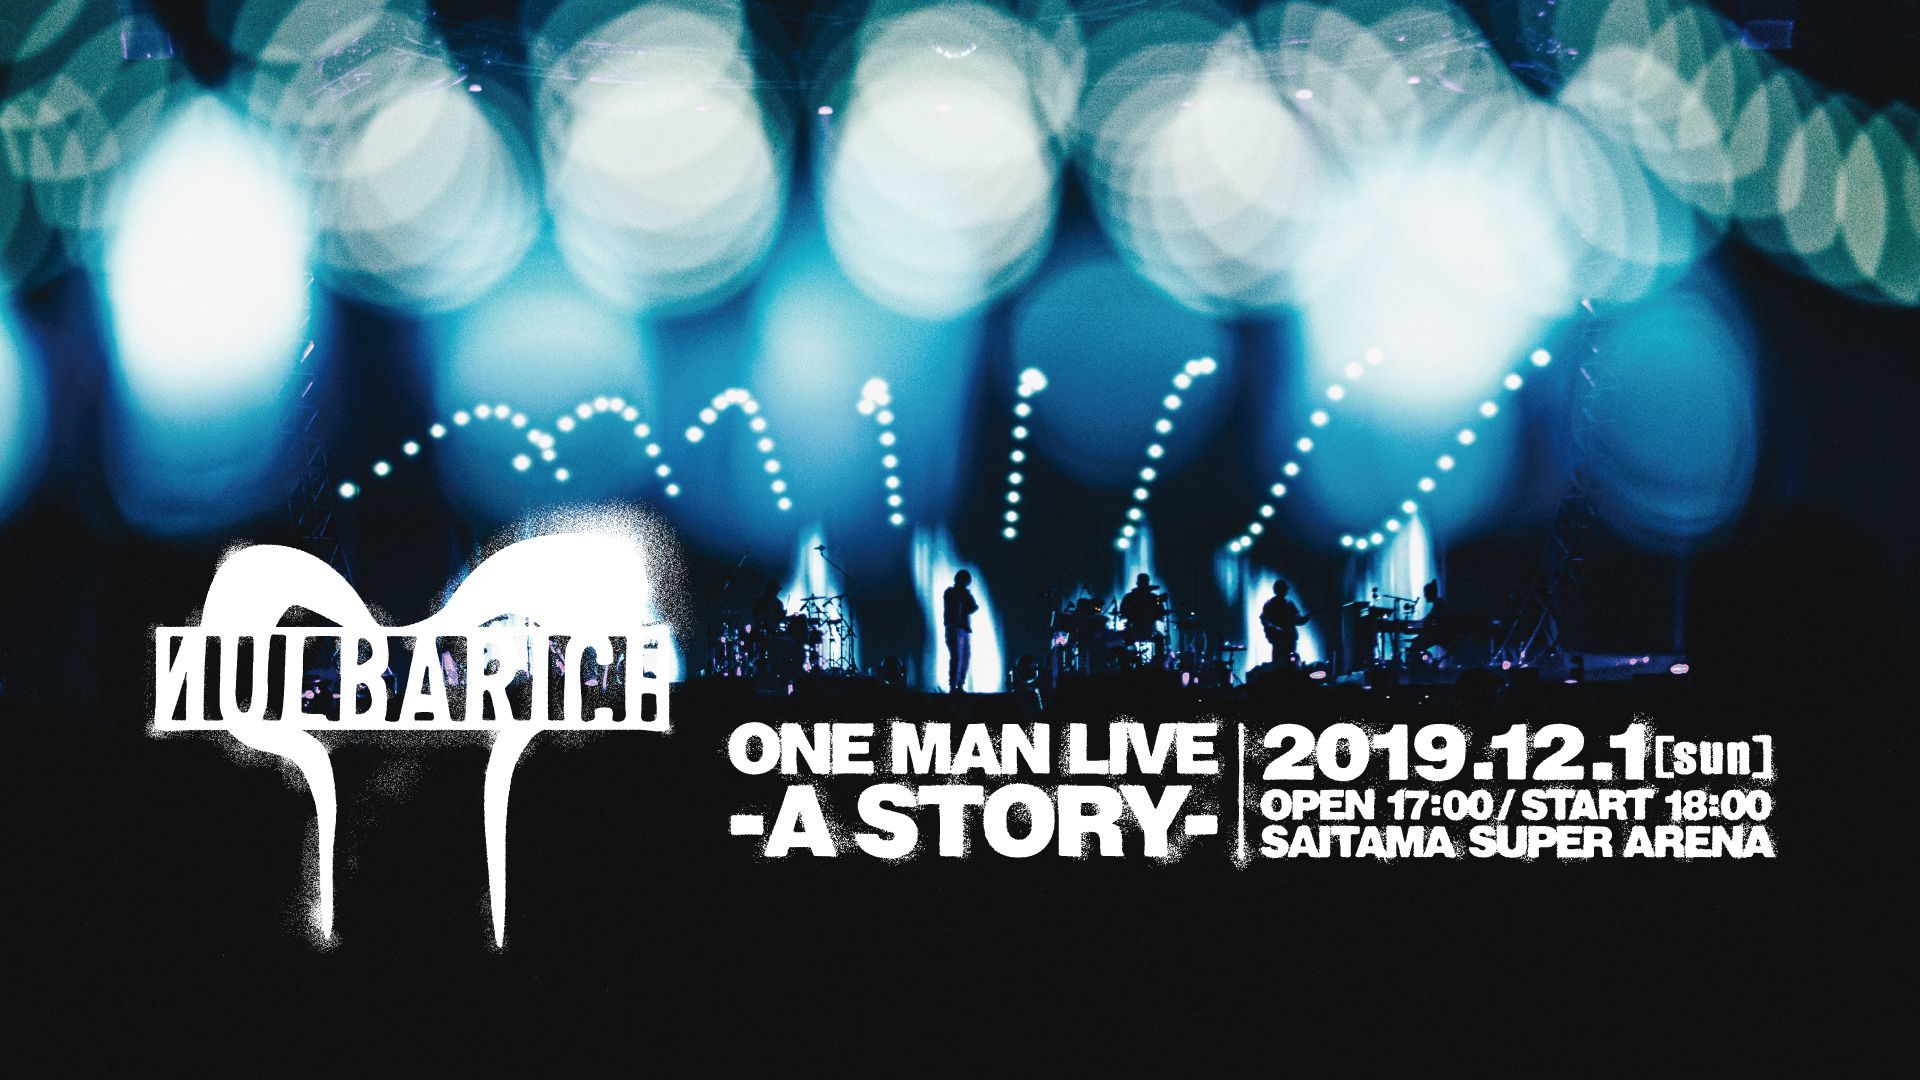 『Nulbarich ONE MAN LIVE -A STORY-』